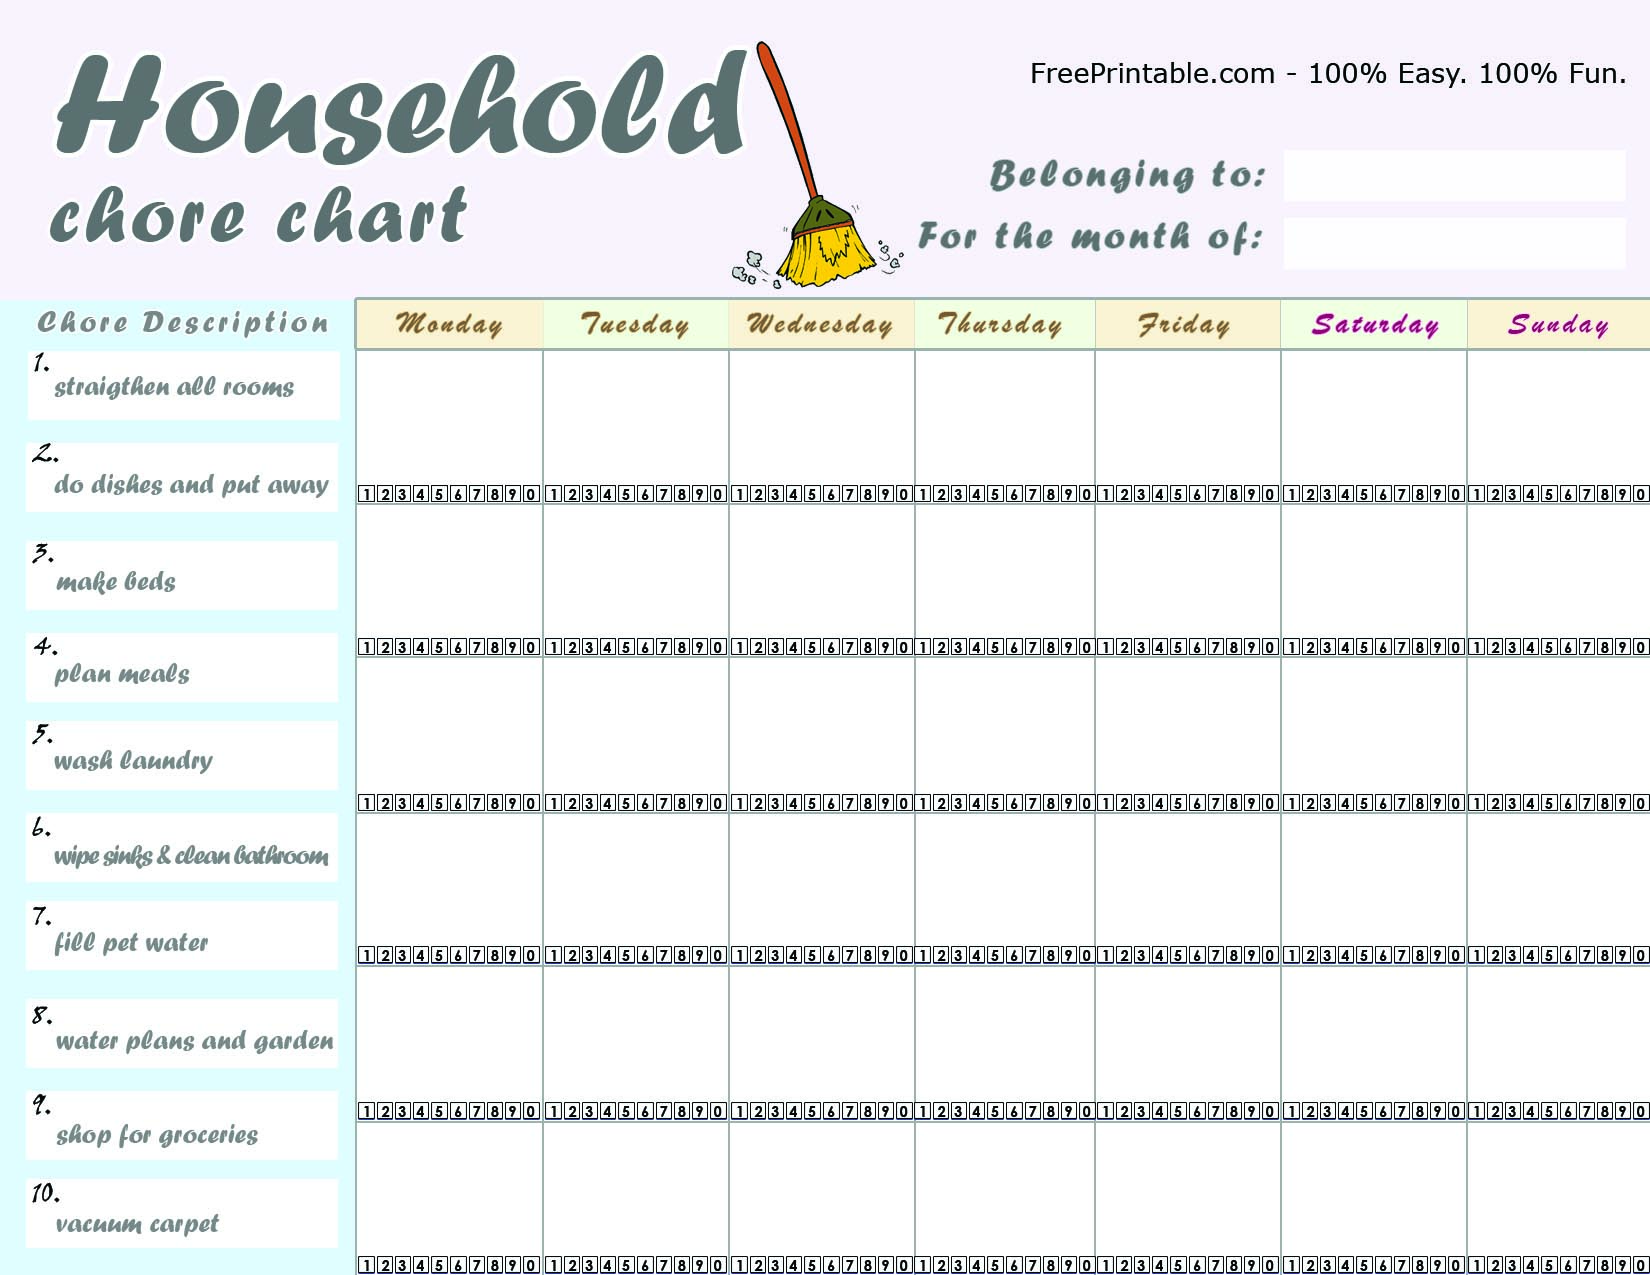 Example Of Household Chore List